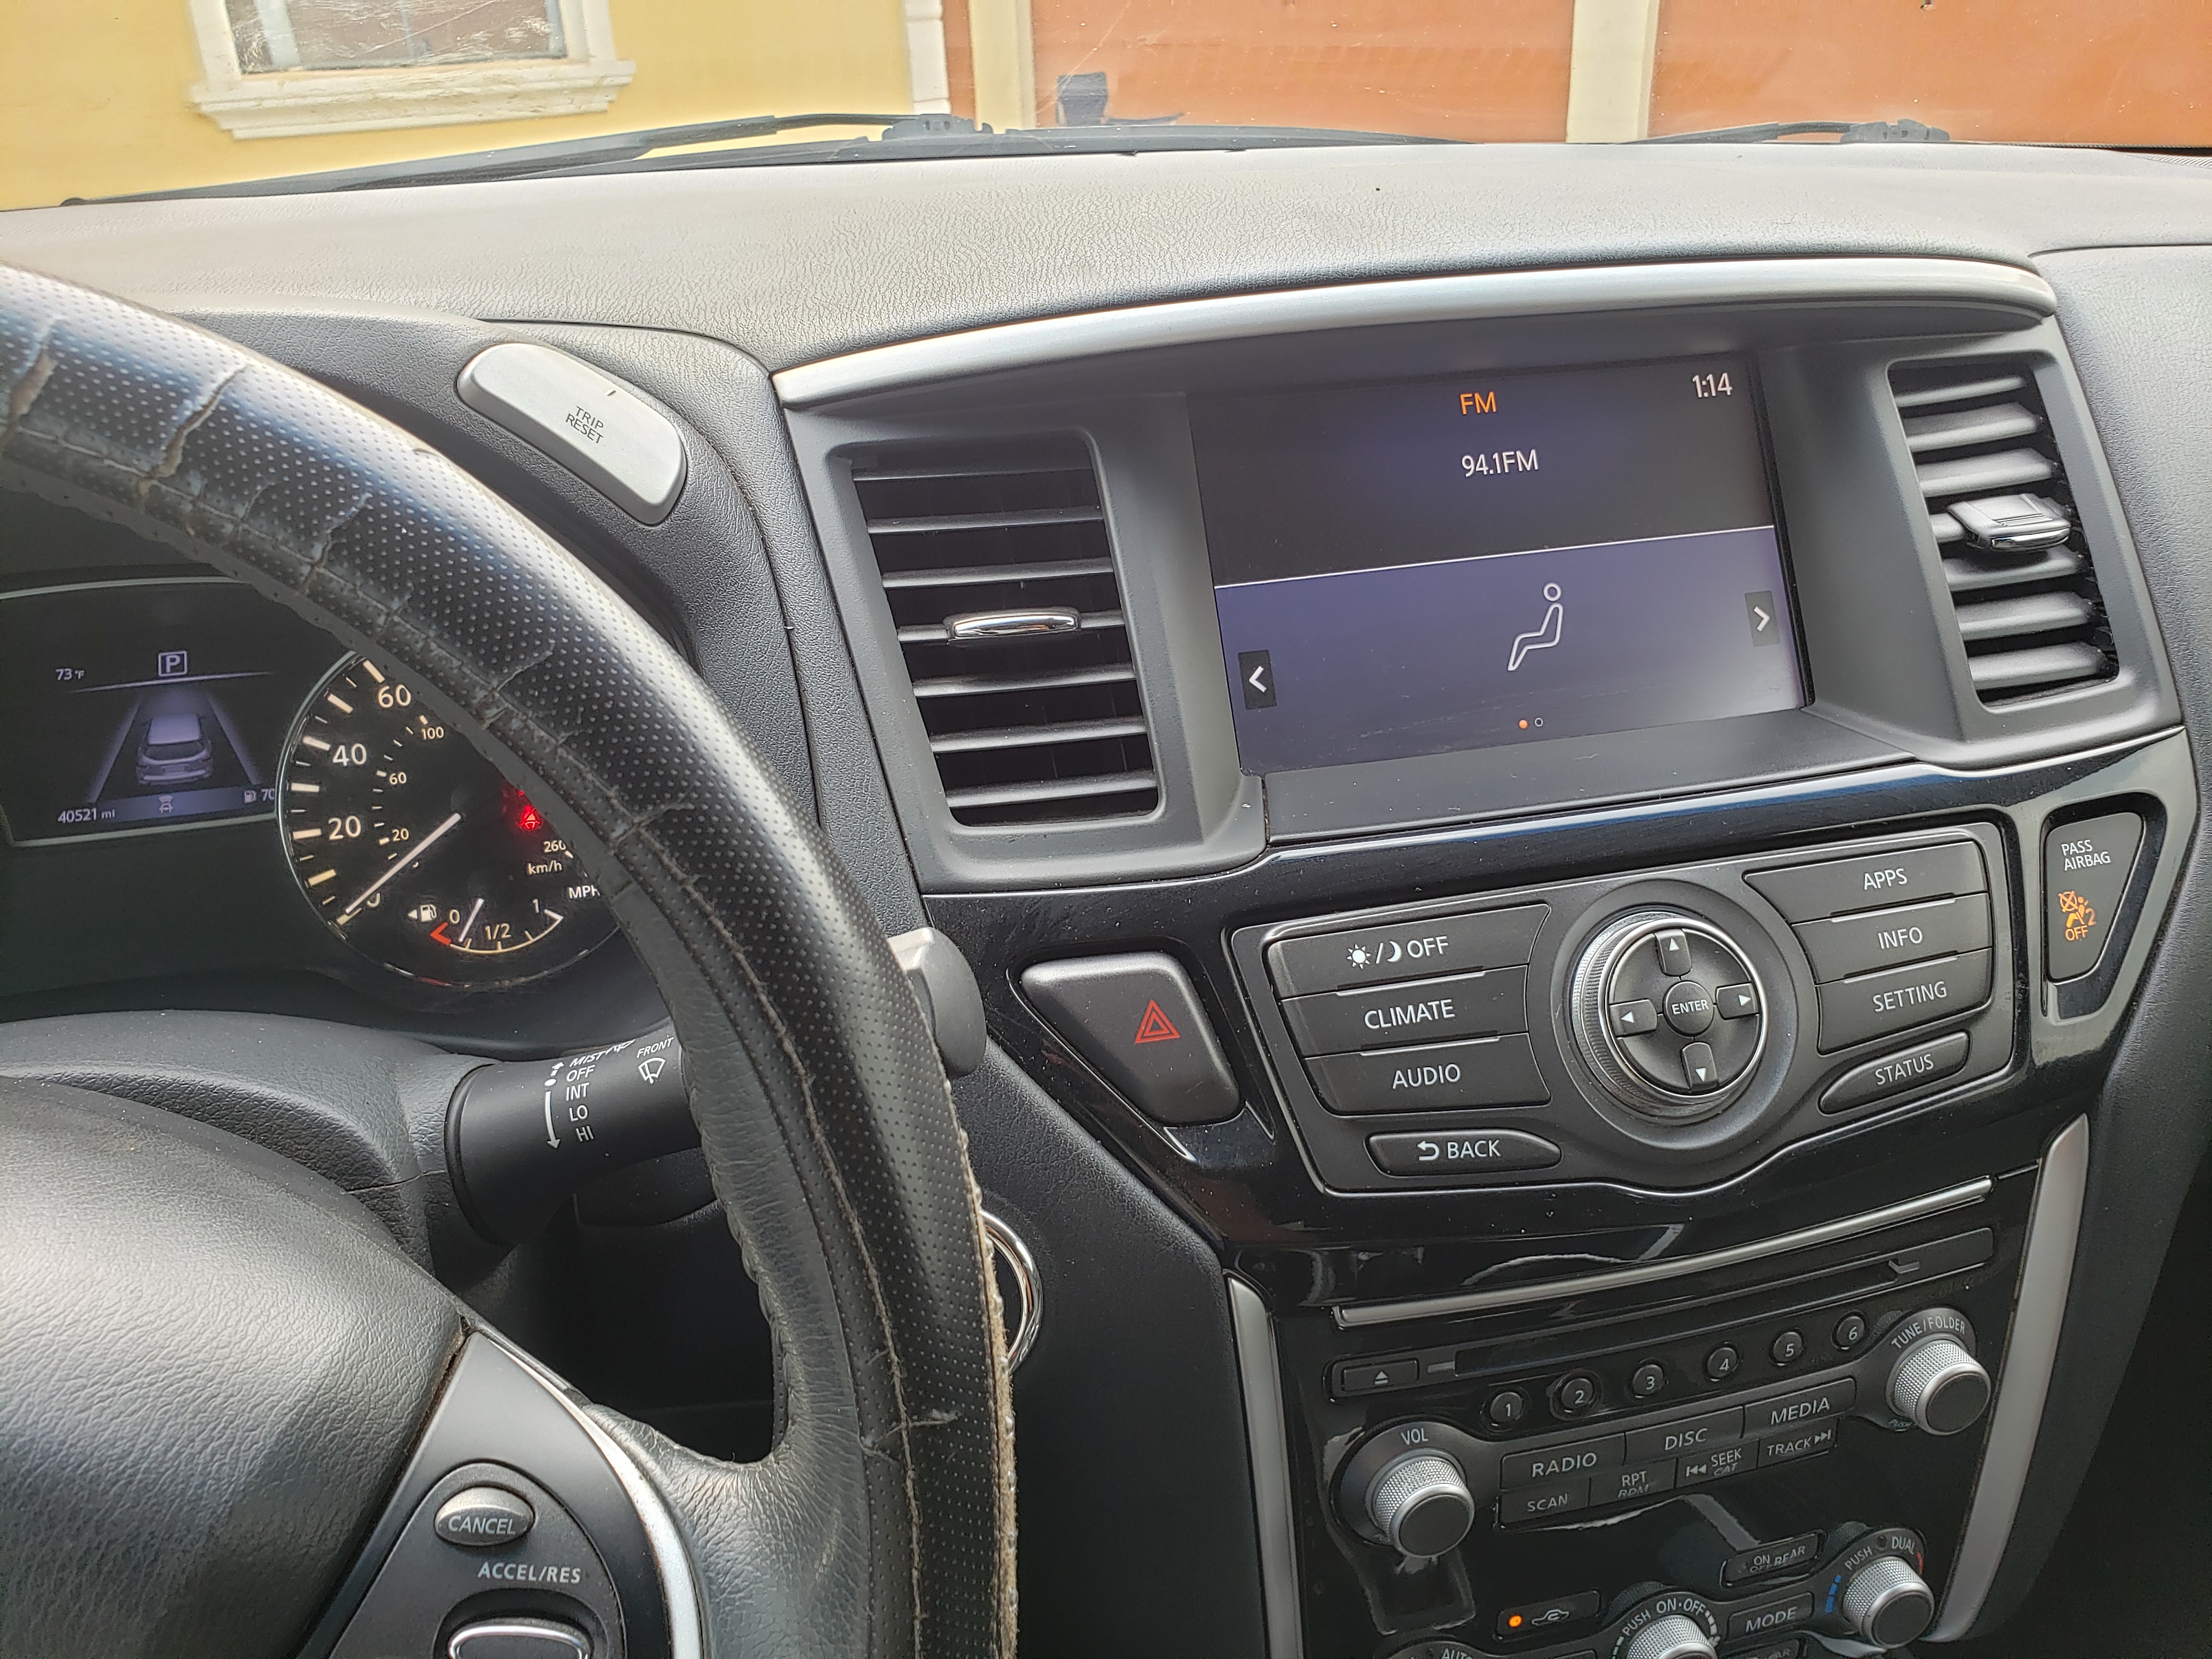 Buy 2018 foreign-used Nissan Pathfinder Lagos